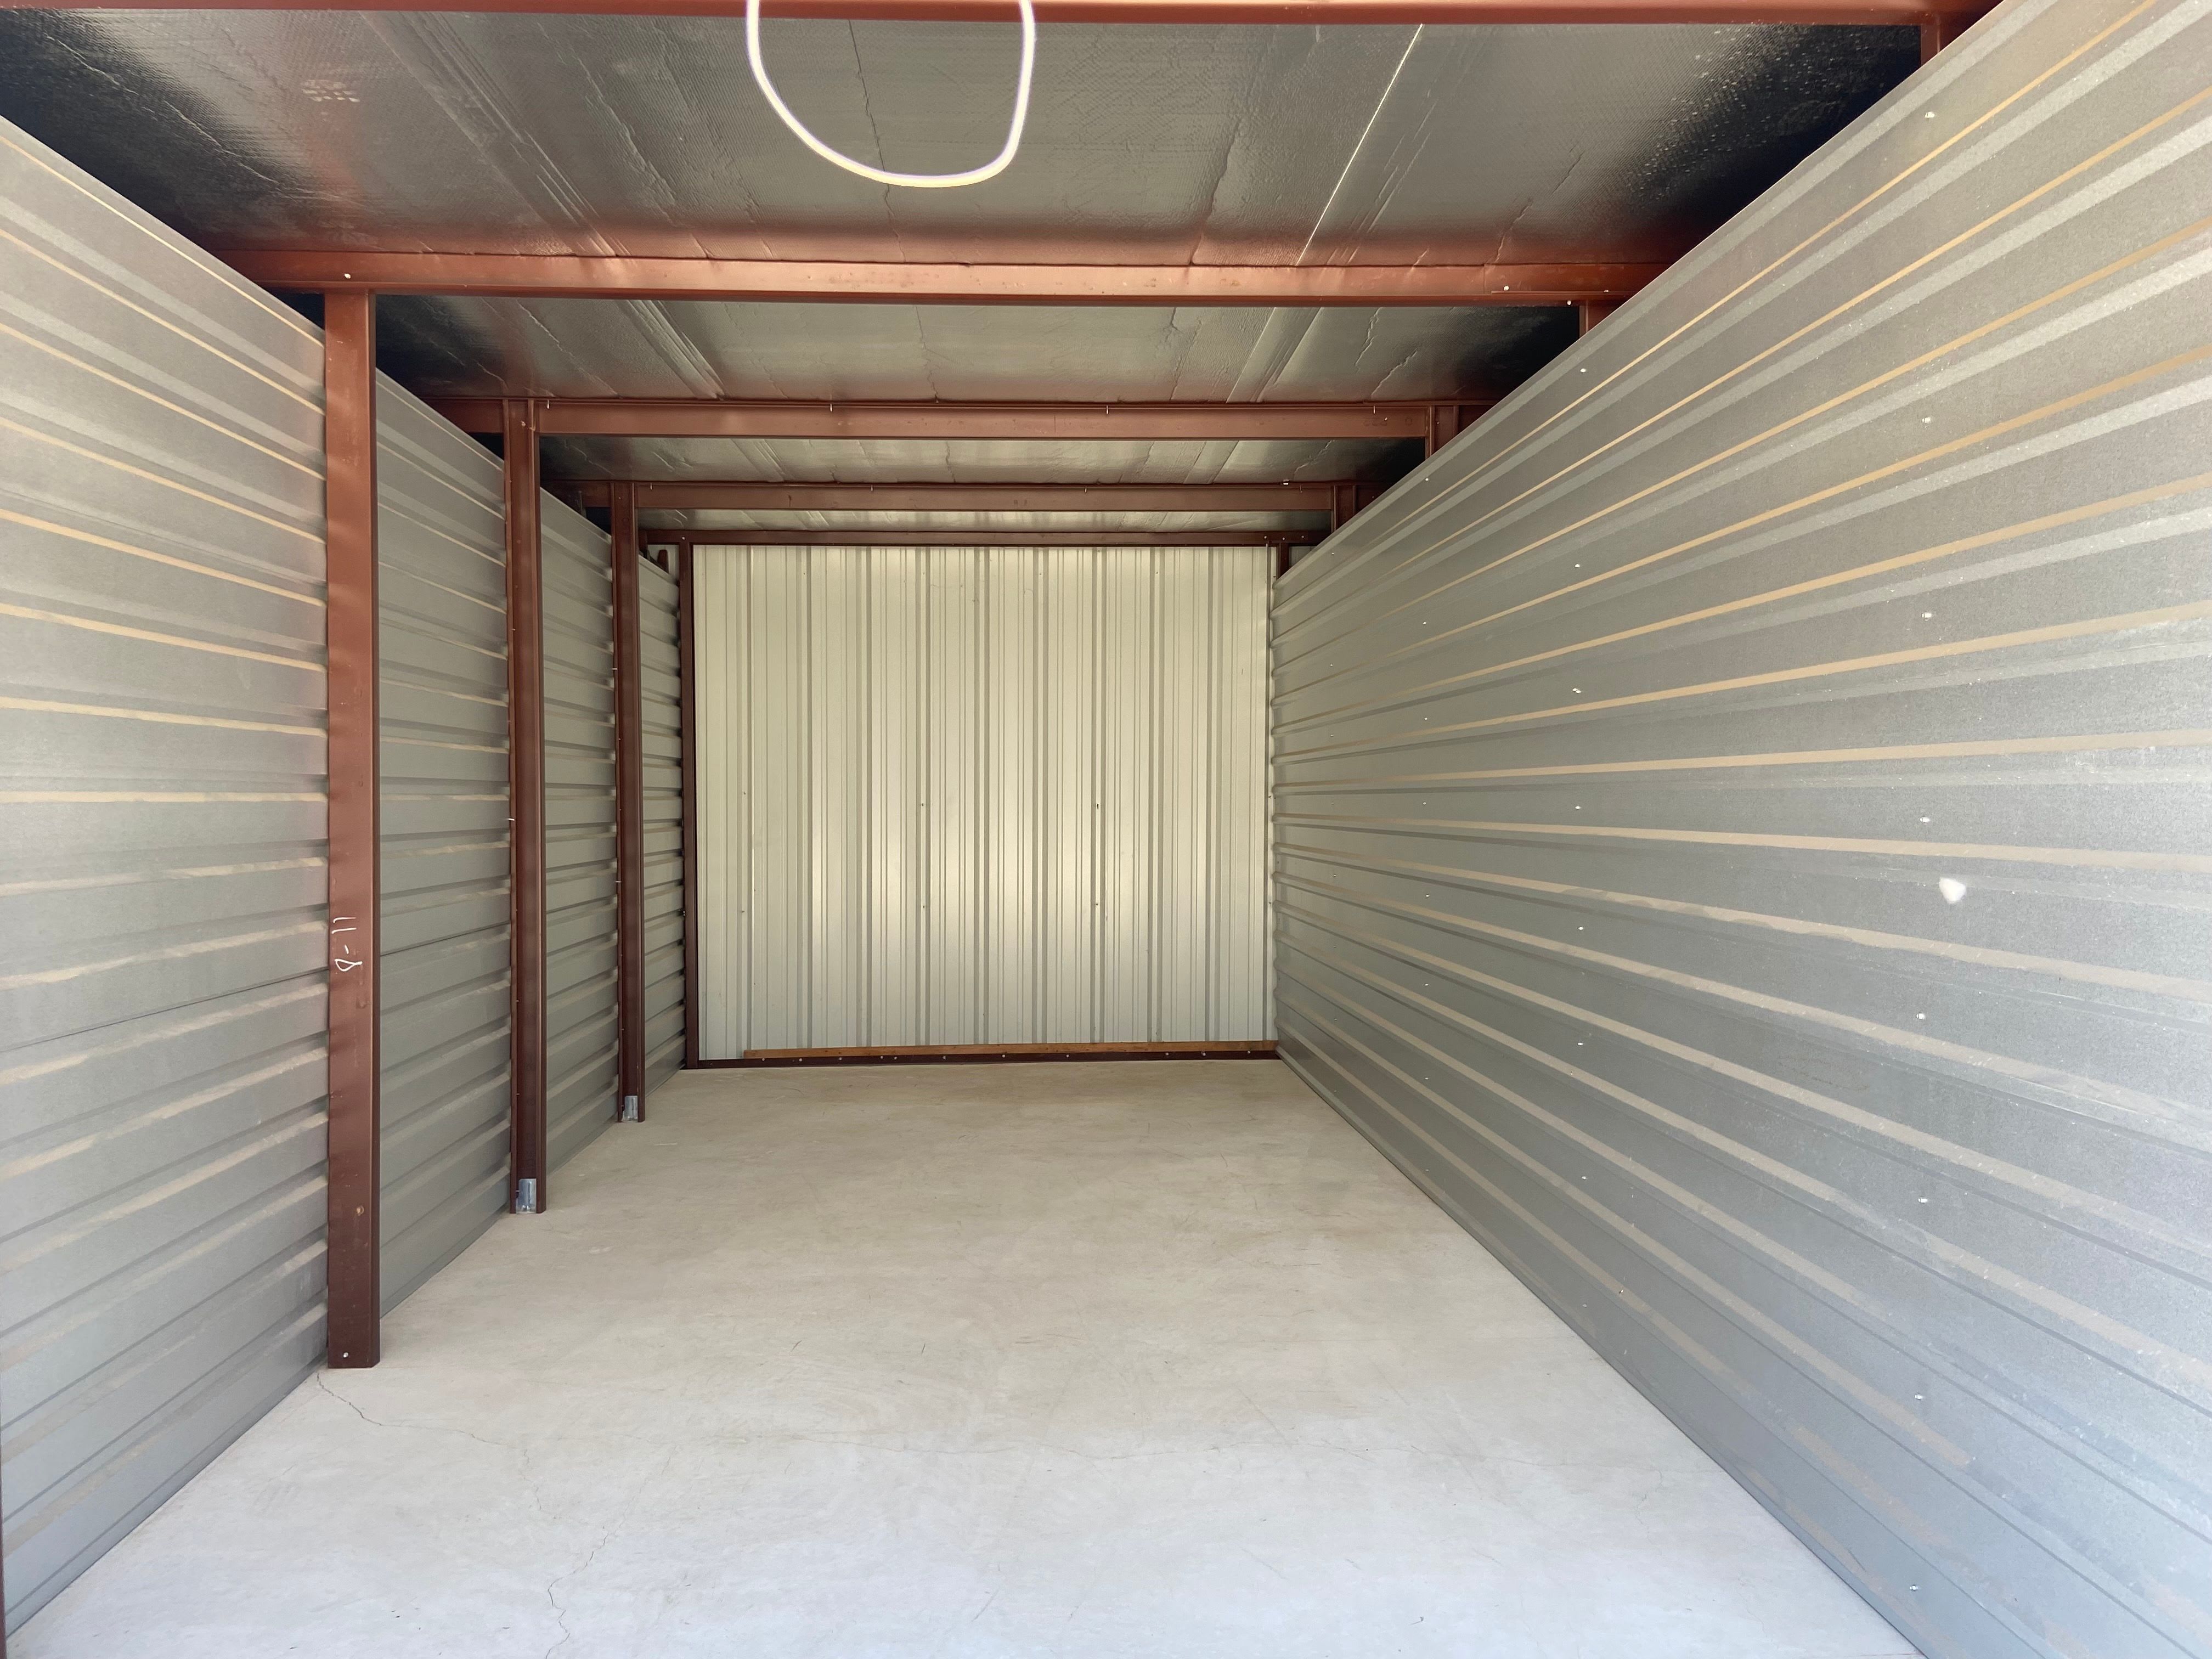 Learn more about features at KO Storage in Pleasanton, Texas